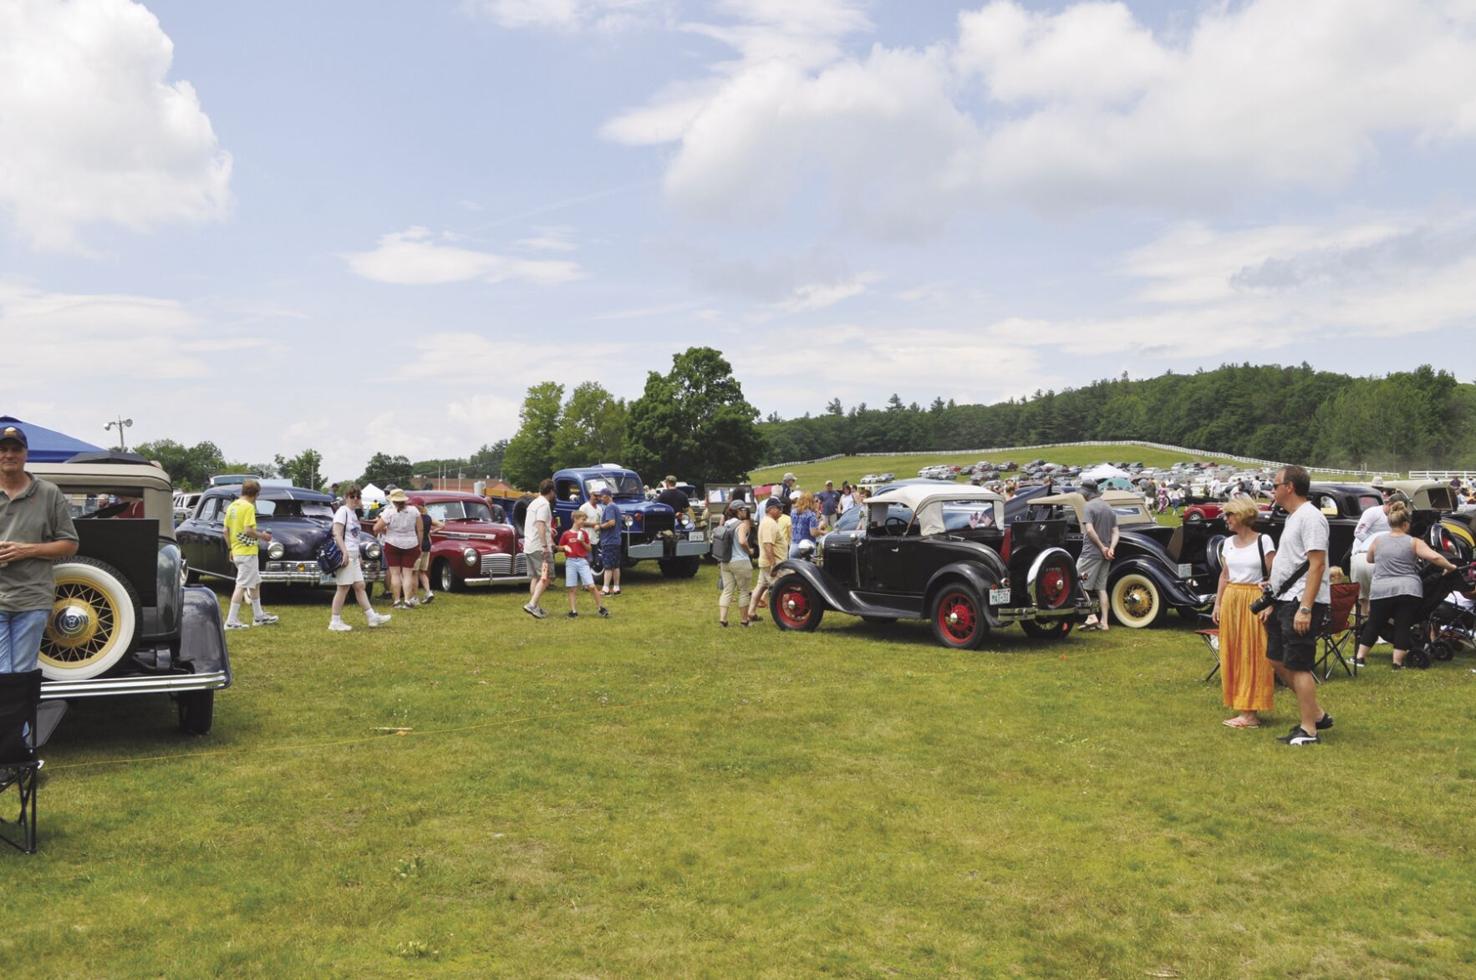 Castle Car Show to be held with Shannon Pond as backdrop